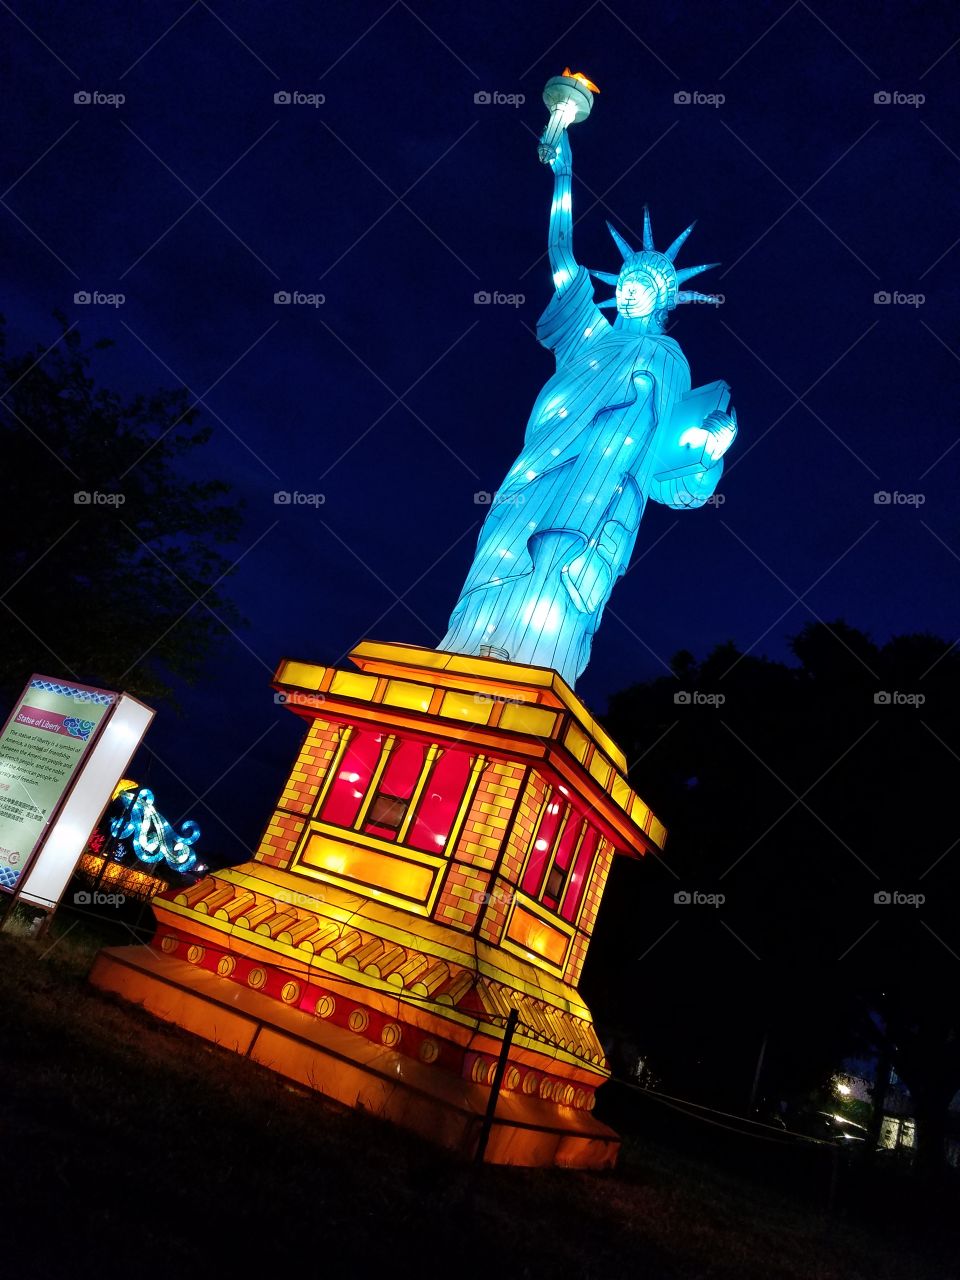 light lantern festival for the Chinese new year. lady liberty